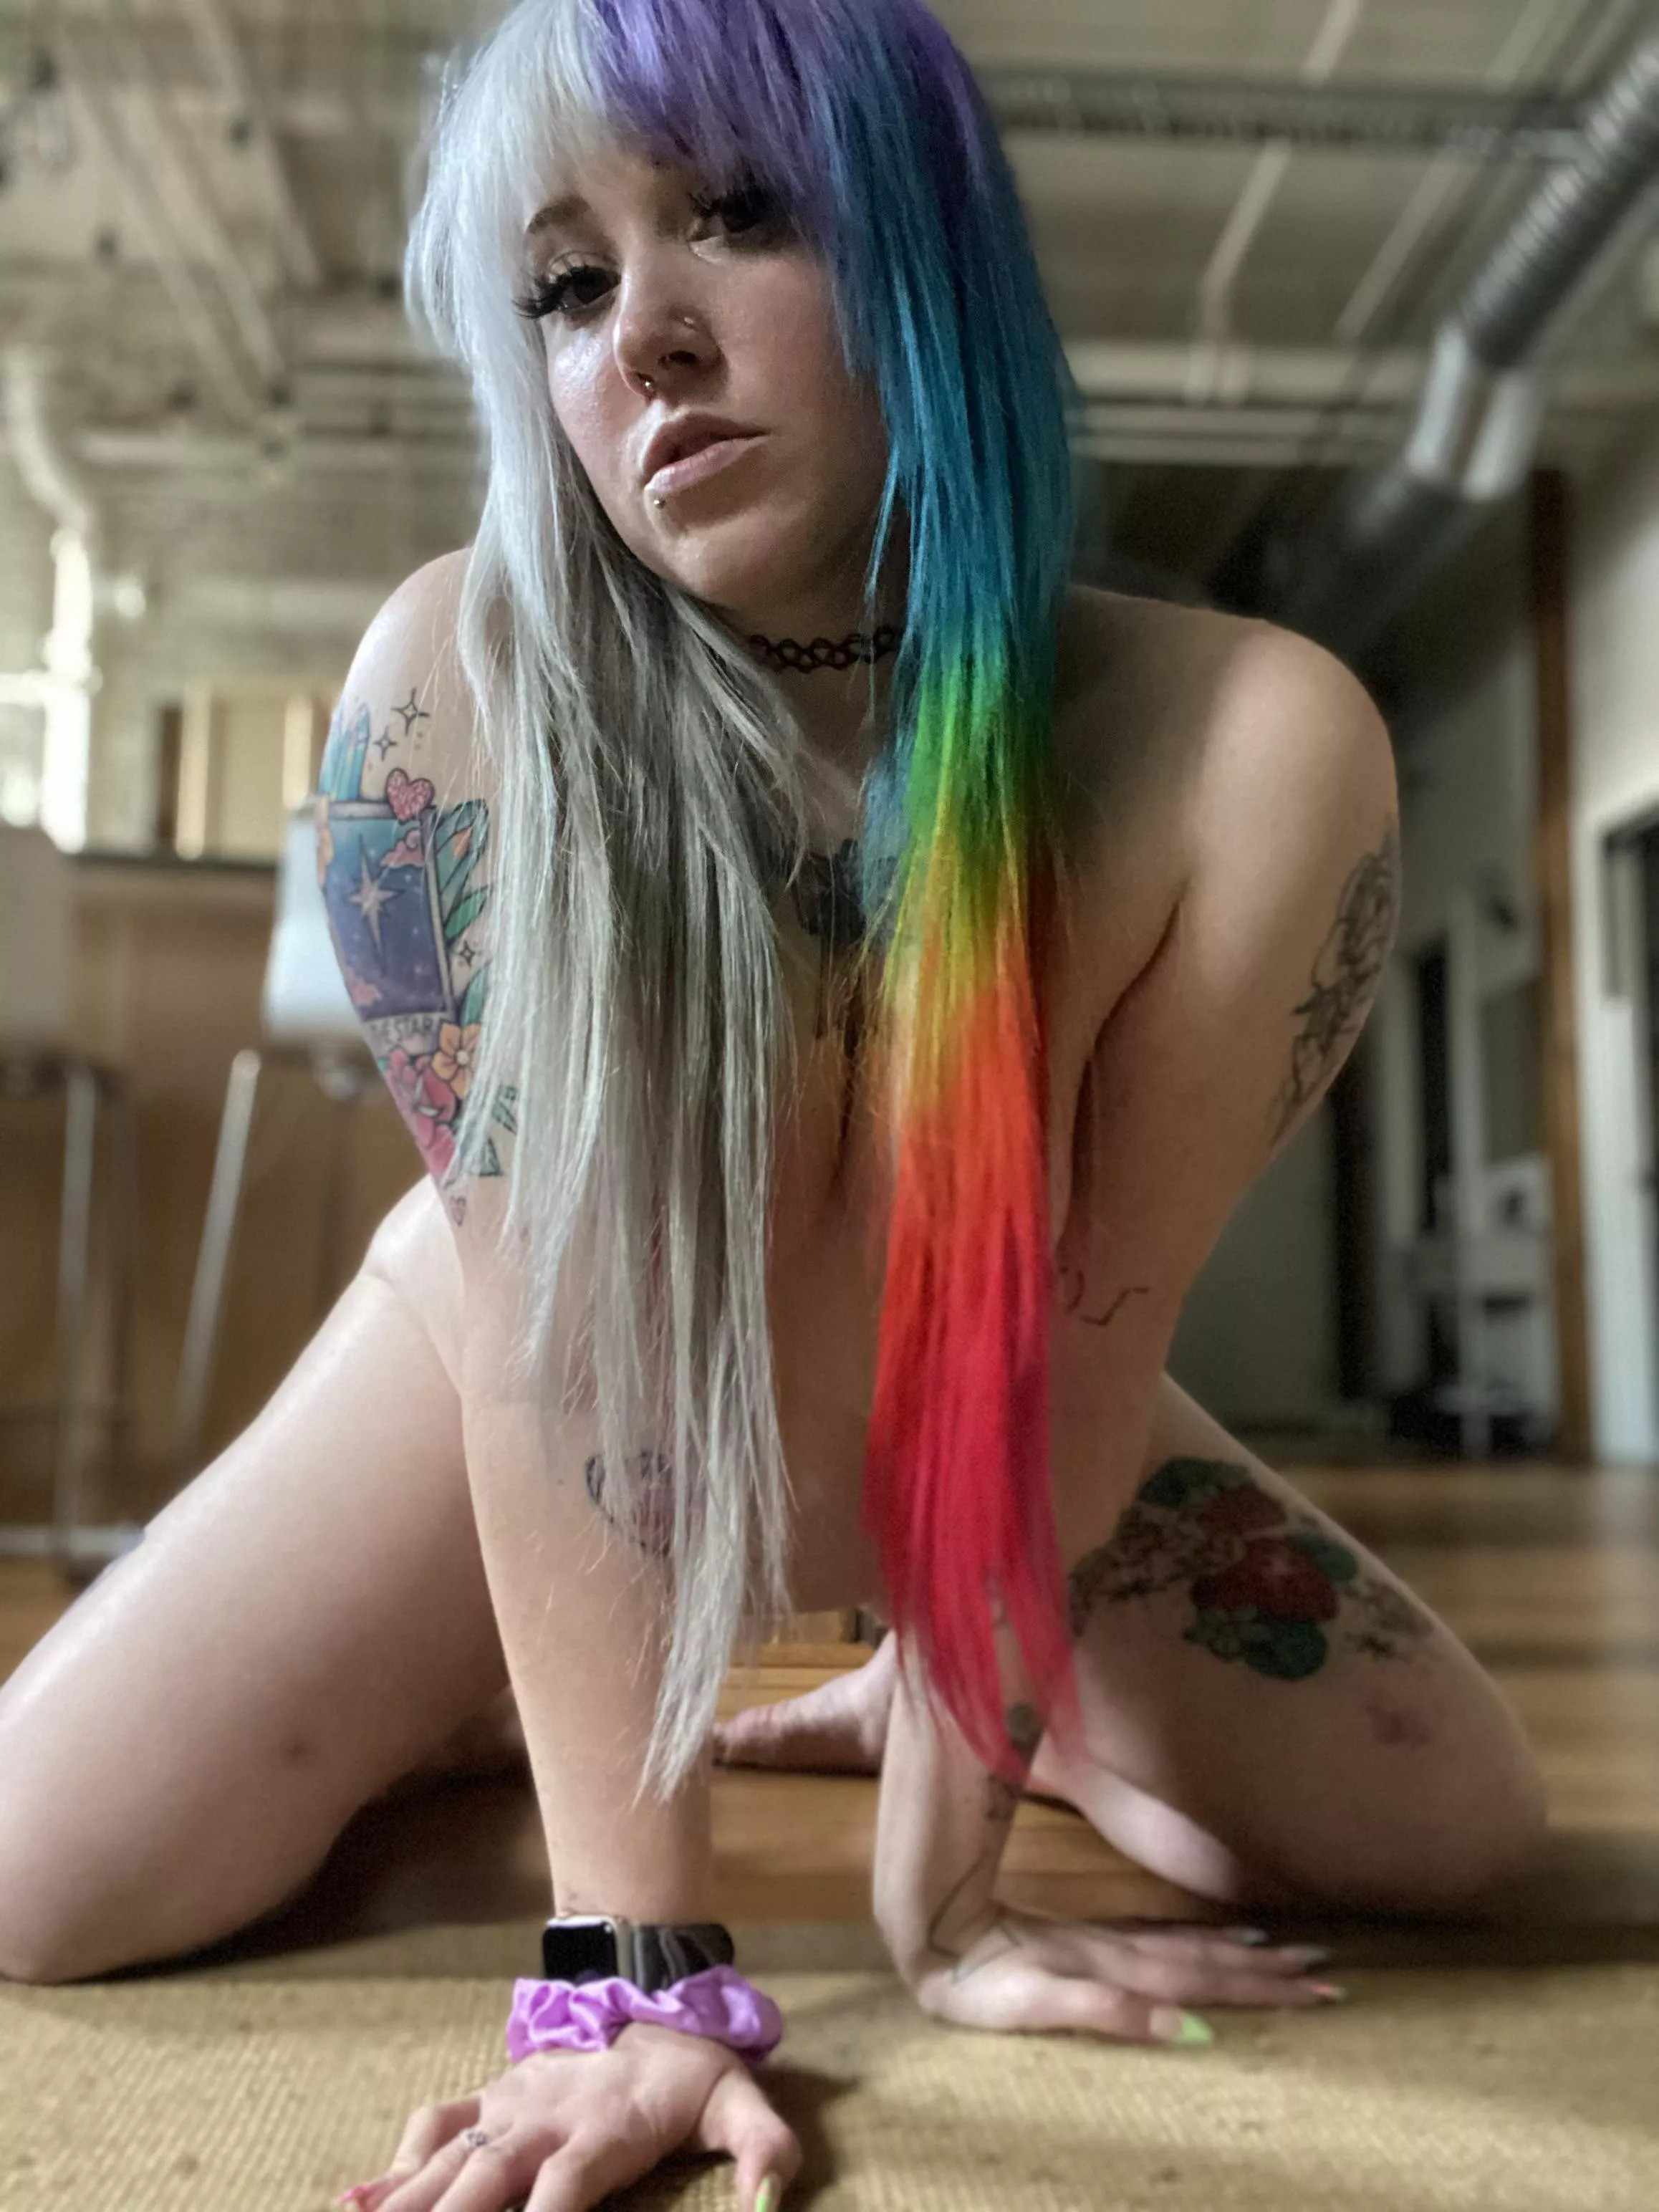 anindita dass recommends nude girl rainbow hair pic